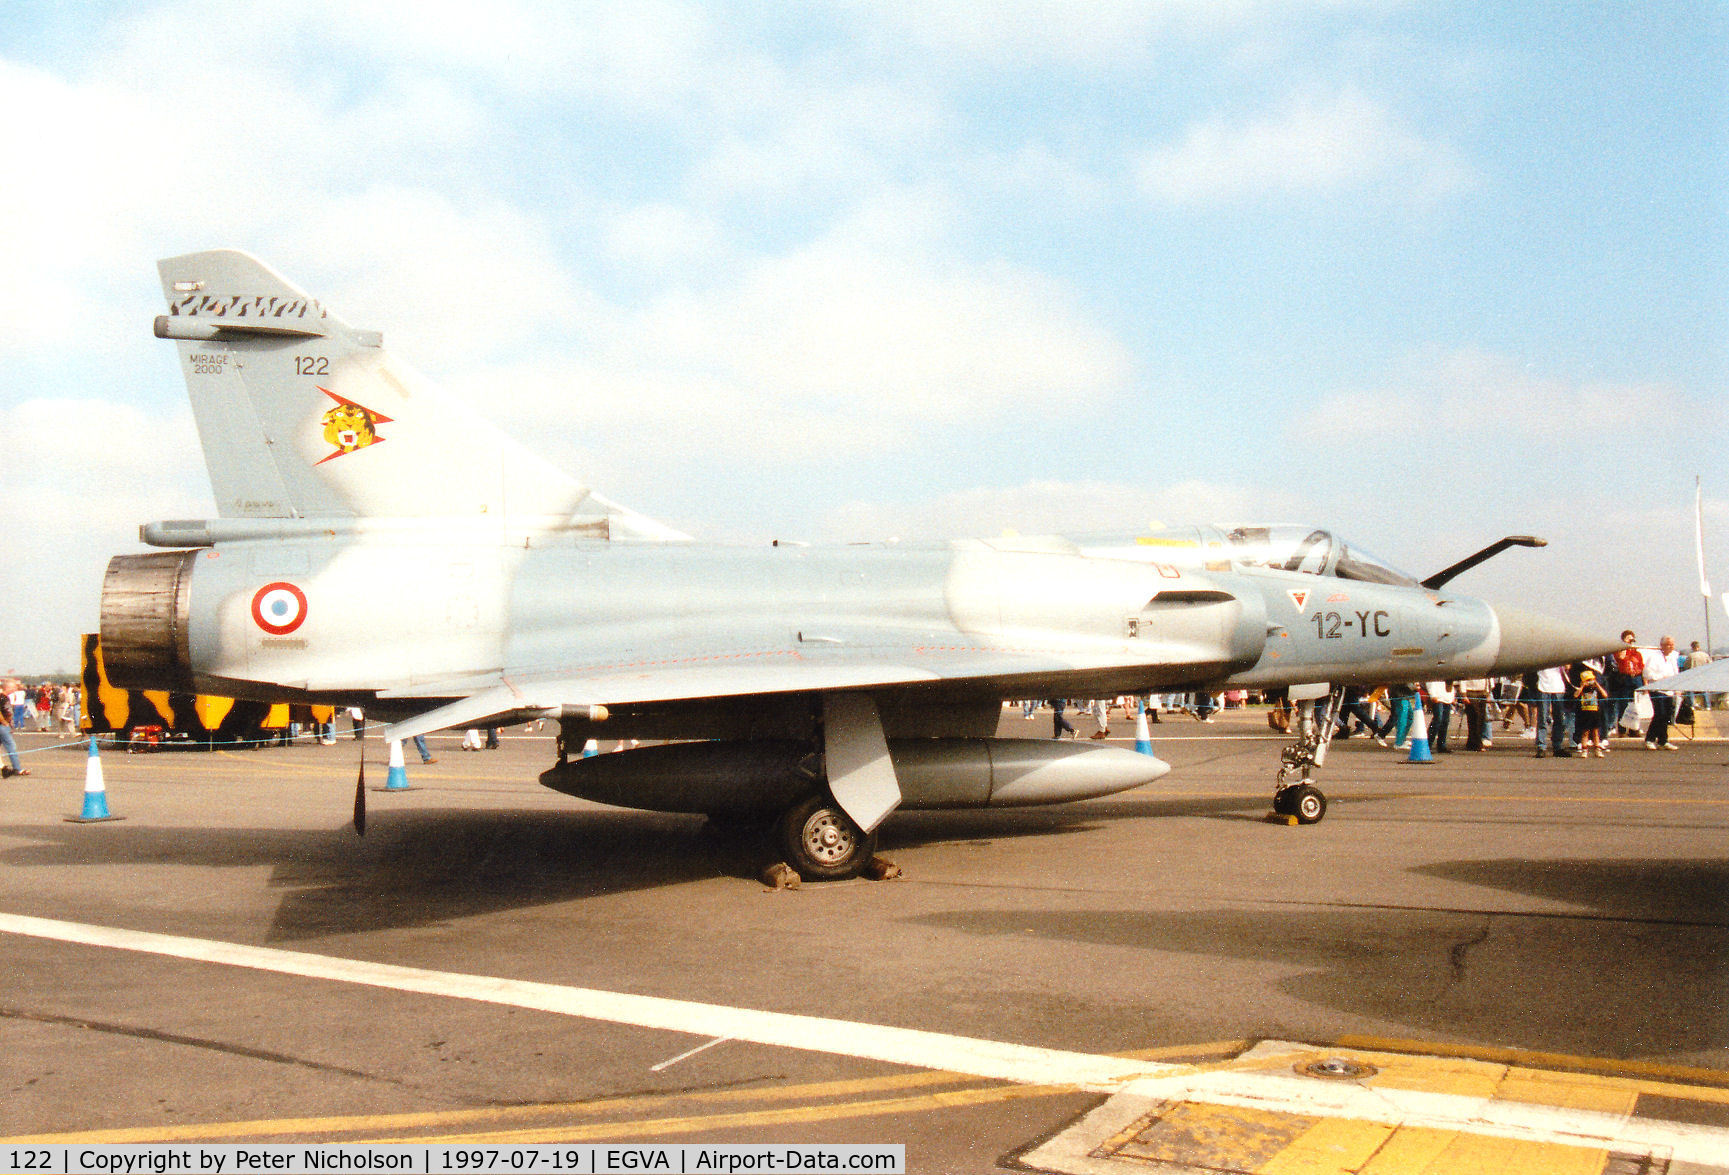 122, Dassault Mirage 2000C C/N 405, Mirage 2000C, callsign French Air Force 7600, of EC 01.012 on display at the 1997 Intnl Air Tattoo at RAF Fairford.